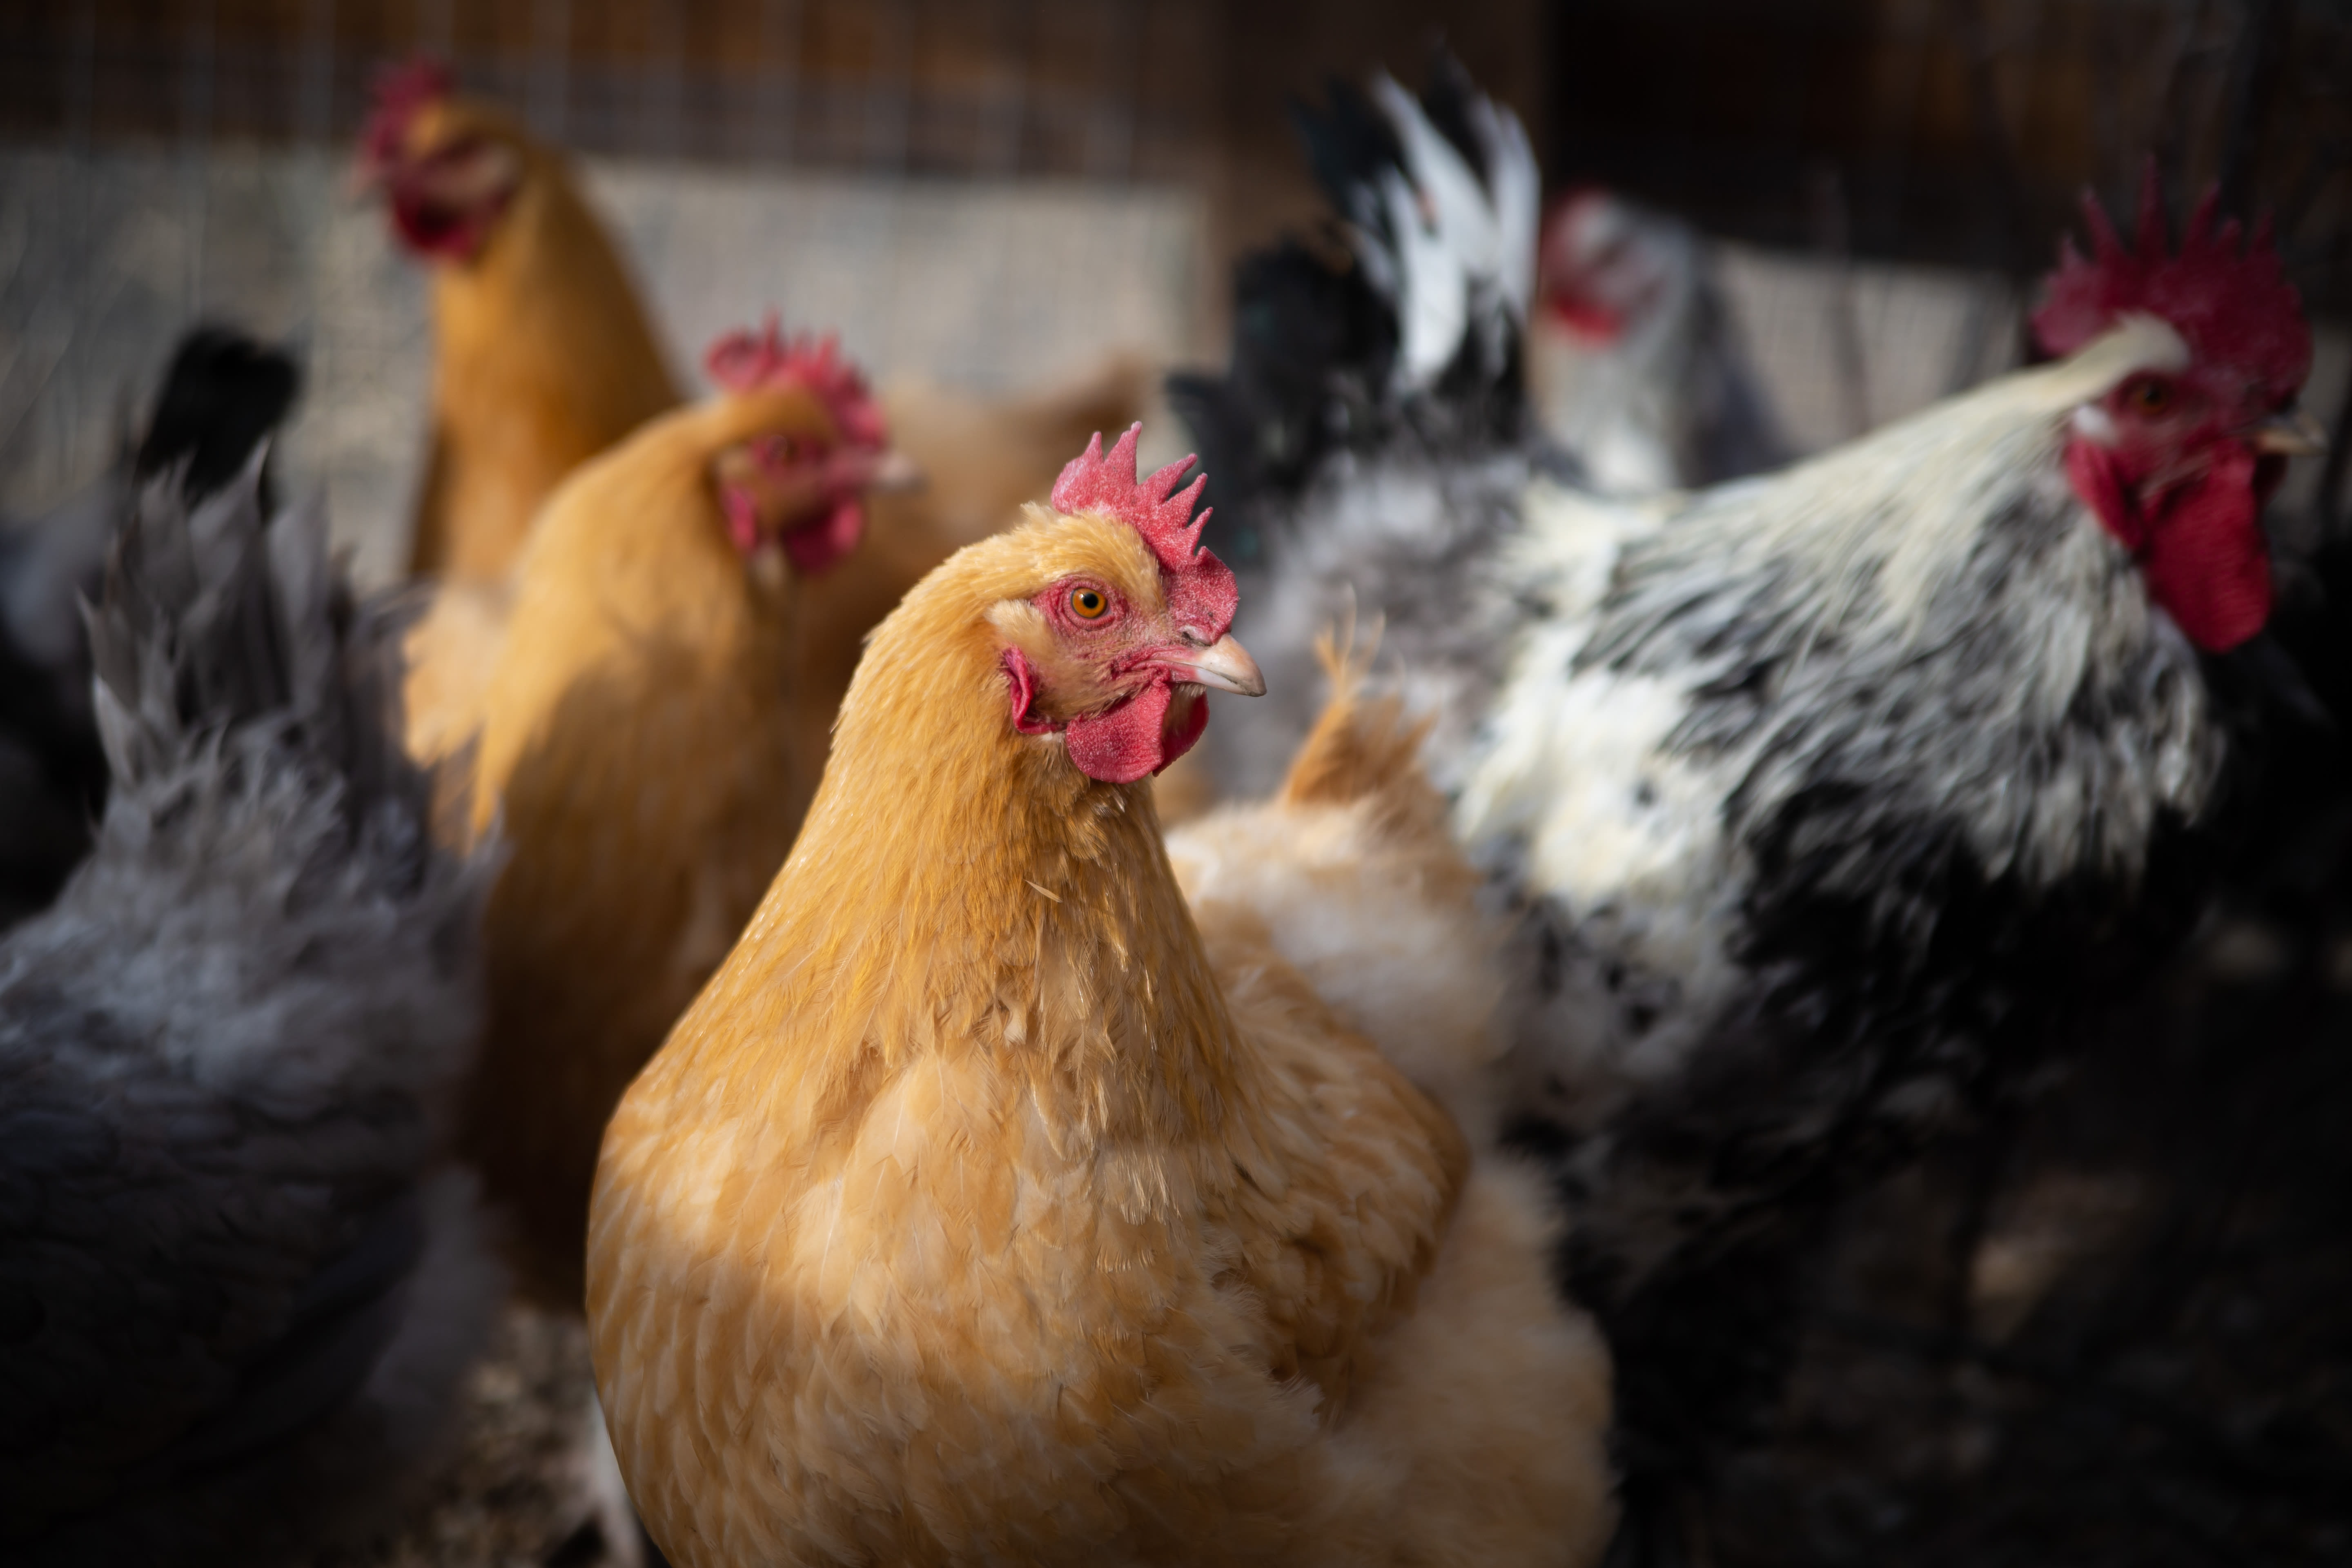 Economist expects an increase in egg prices if bird flu worsens in Colorado